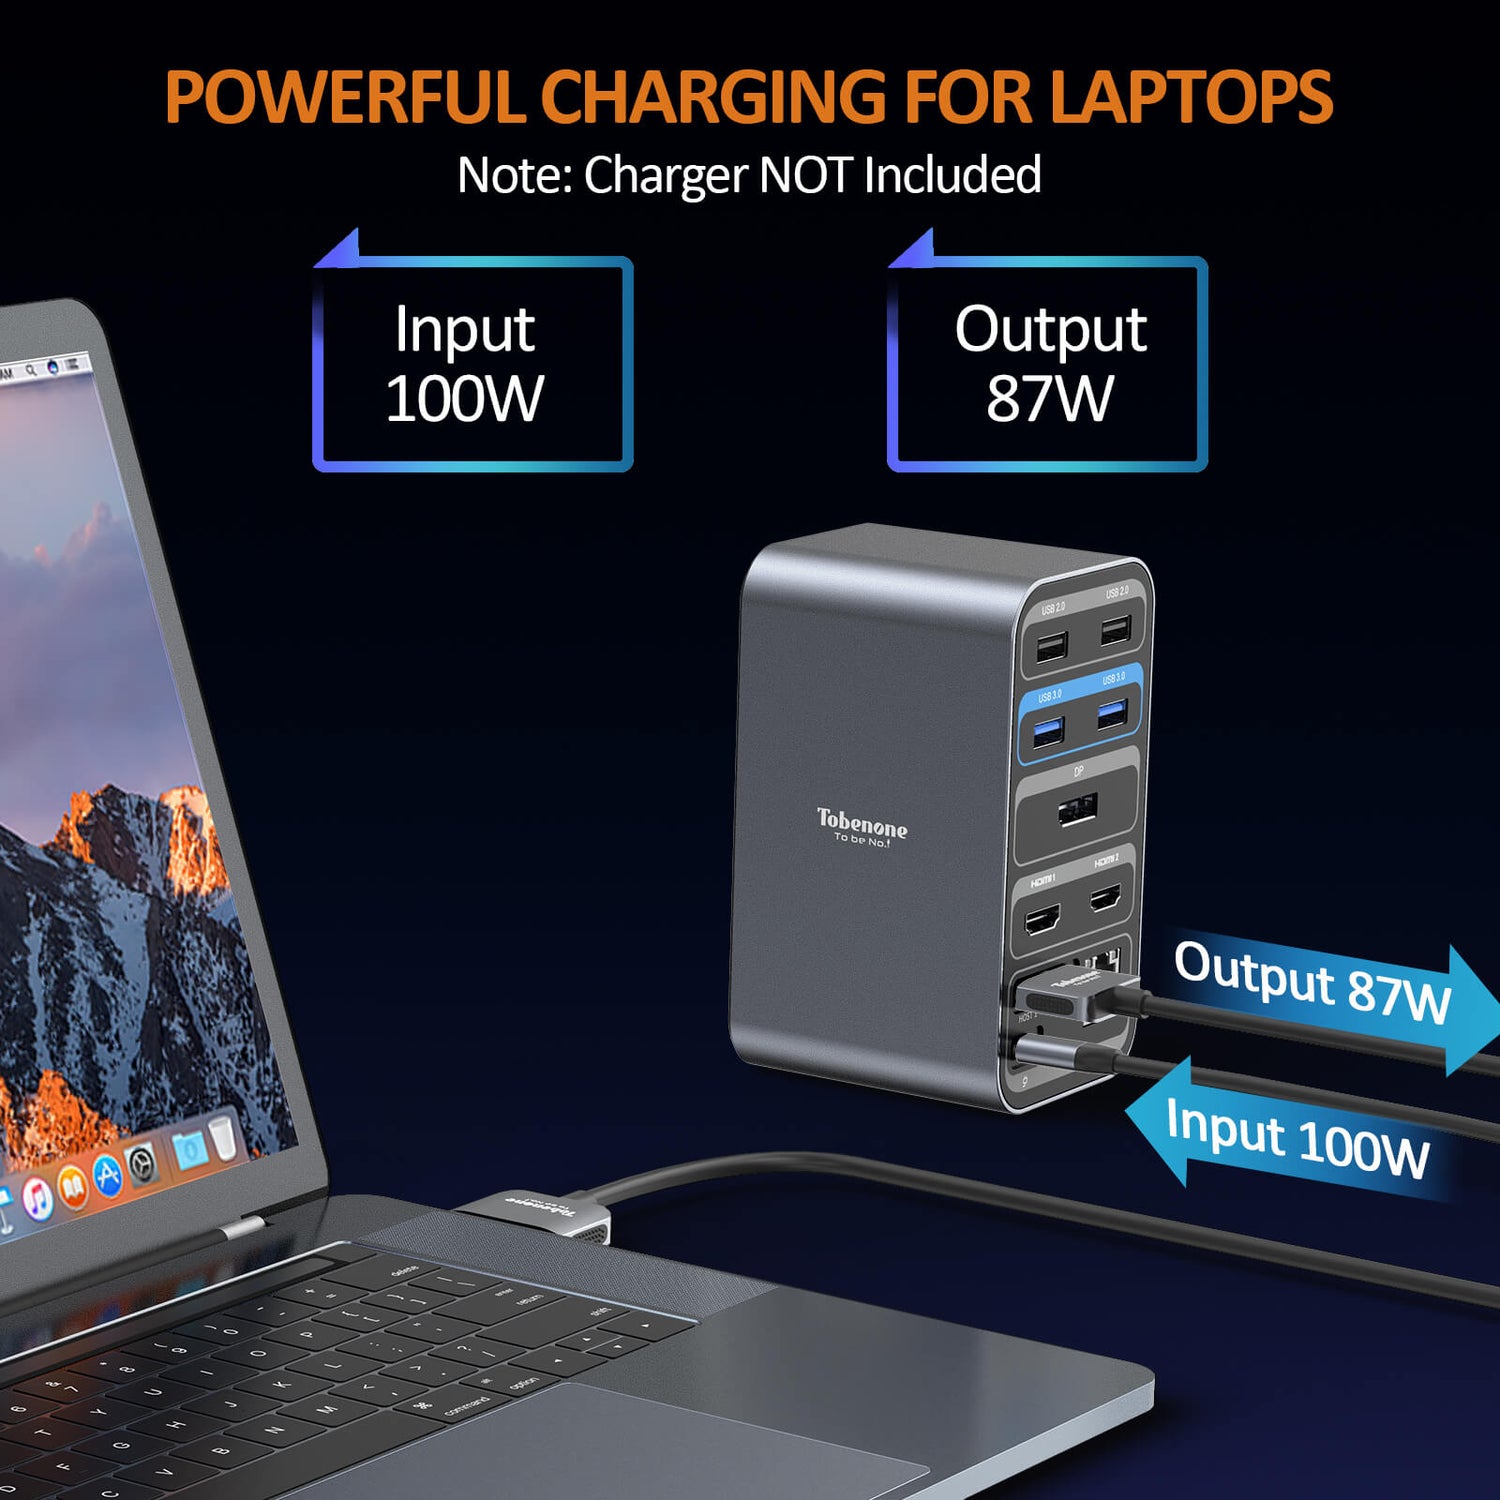 Powerful charging for laptops PD3.0 input up to 100W